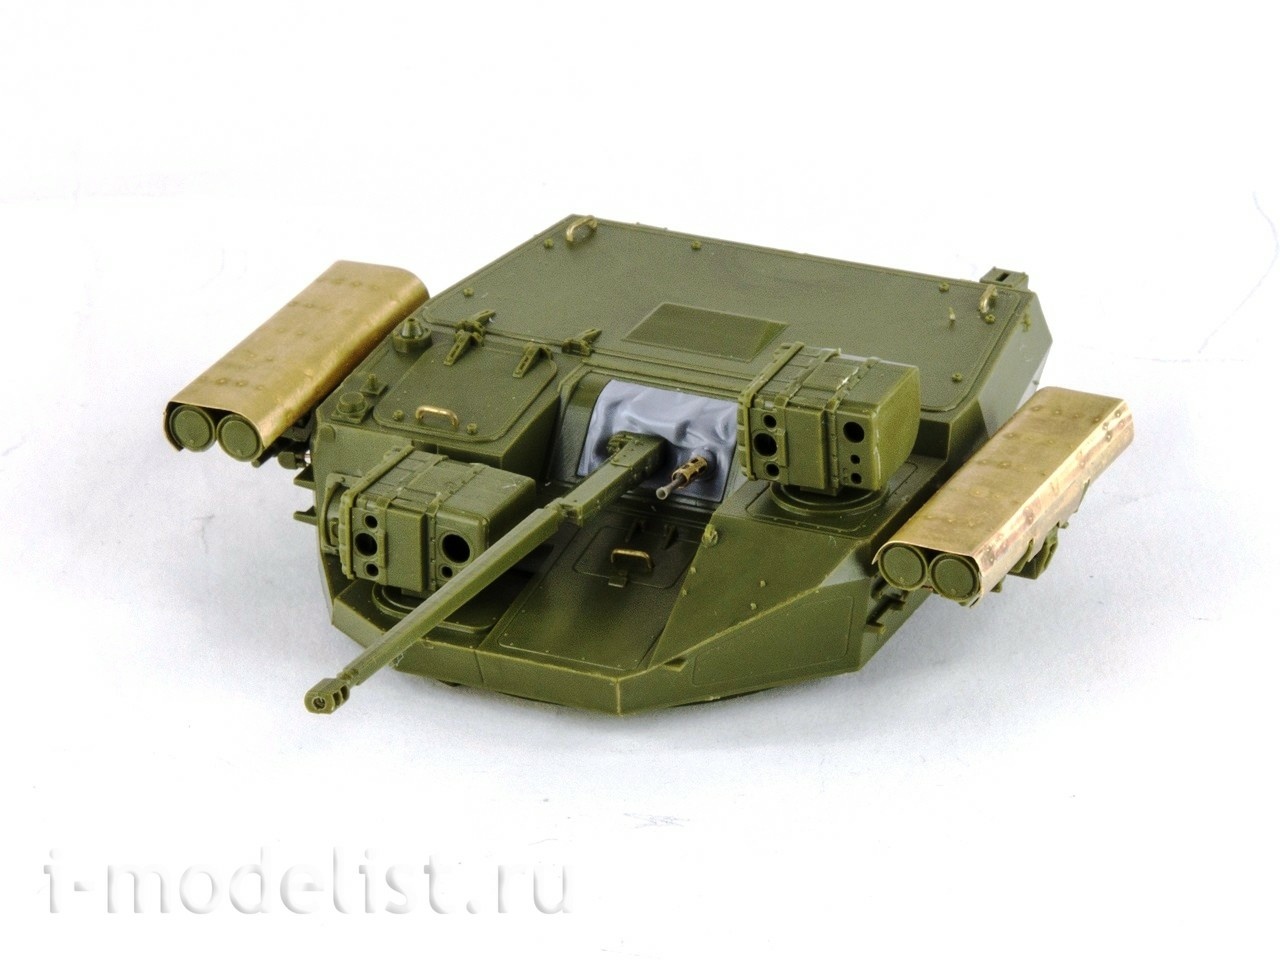 035322 Micro Design 1/35 Tracked Tank Support Vehicle Object 199 T-15 Basic Kit